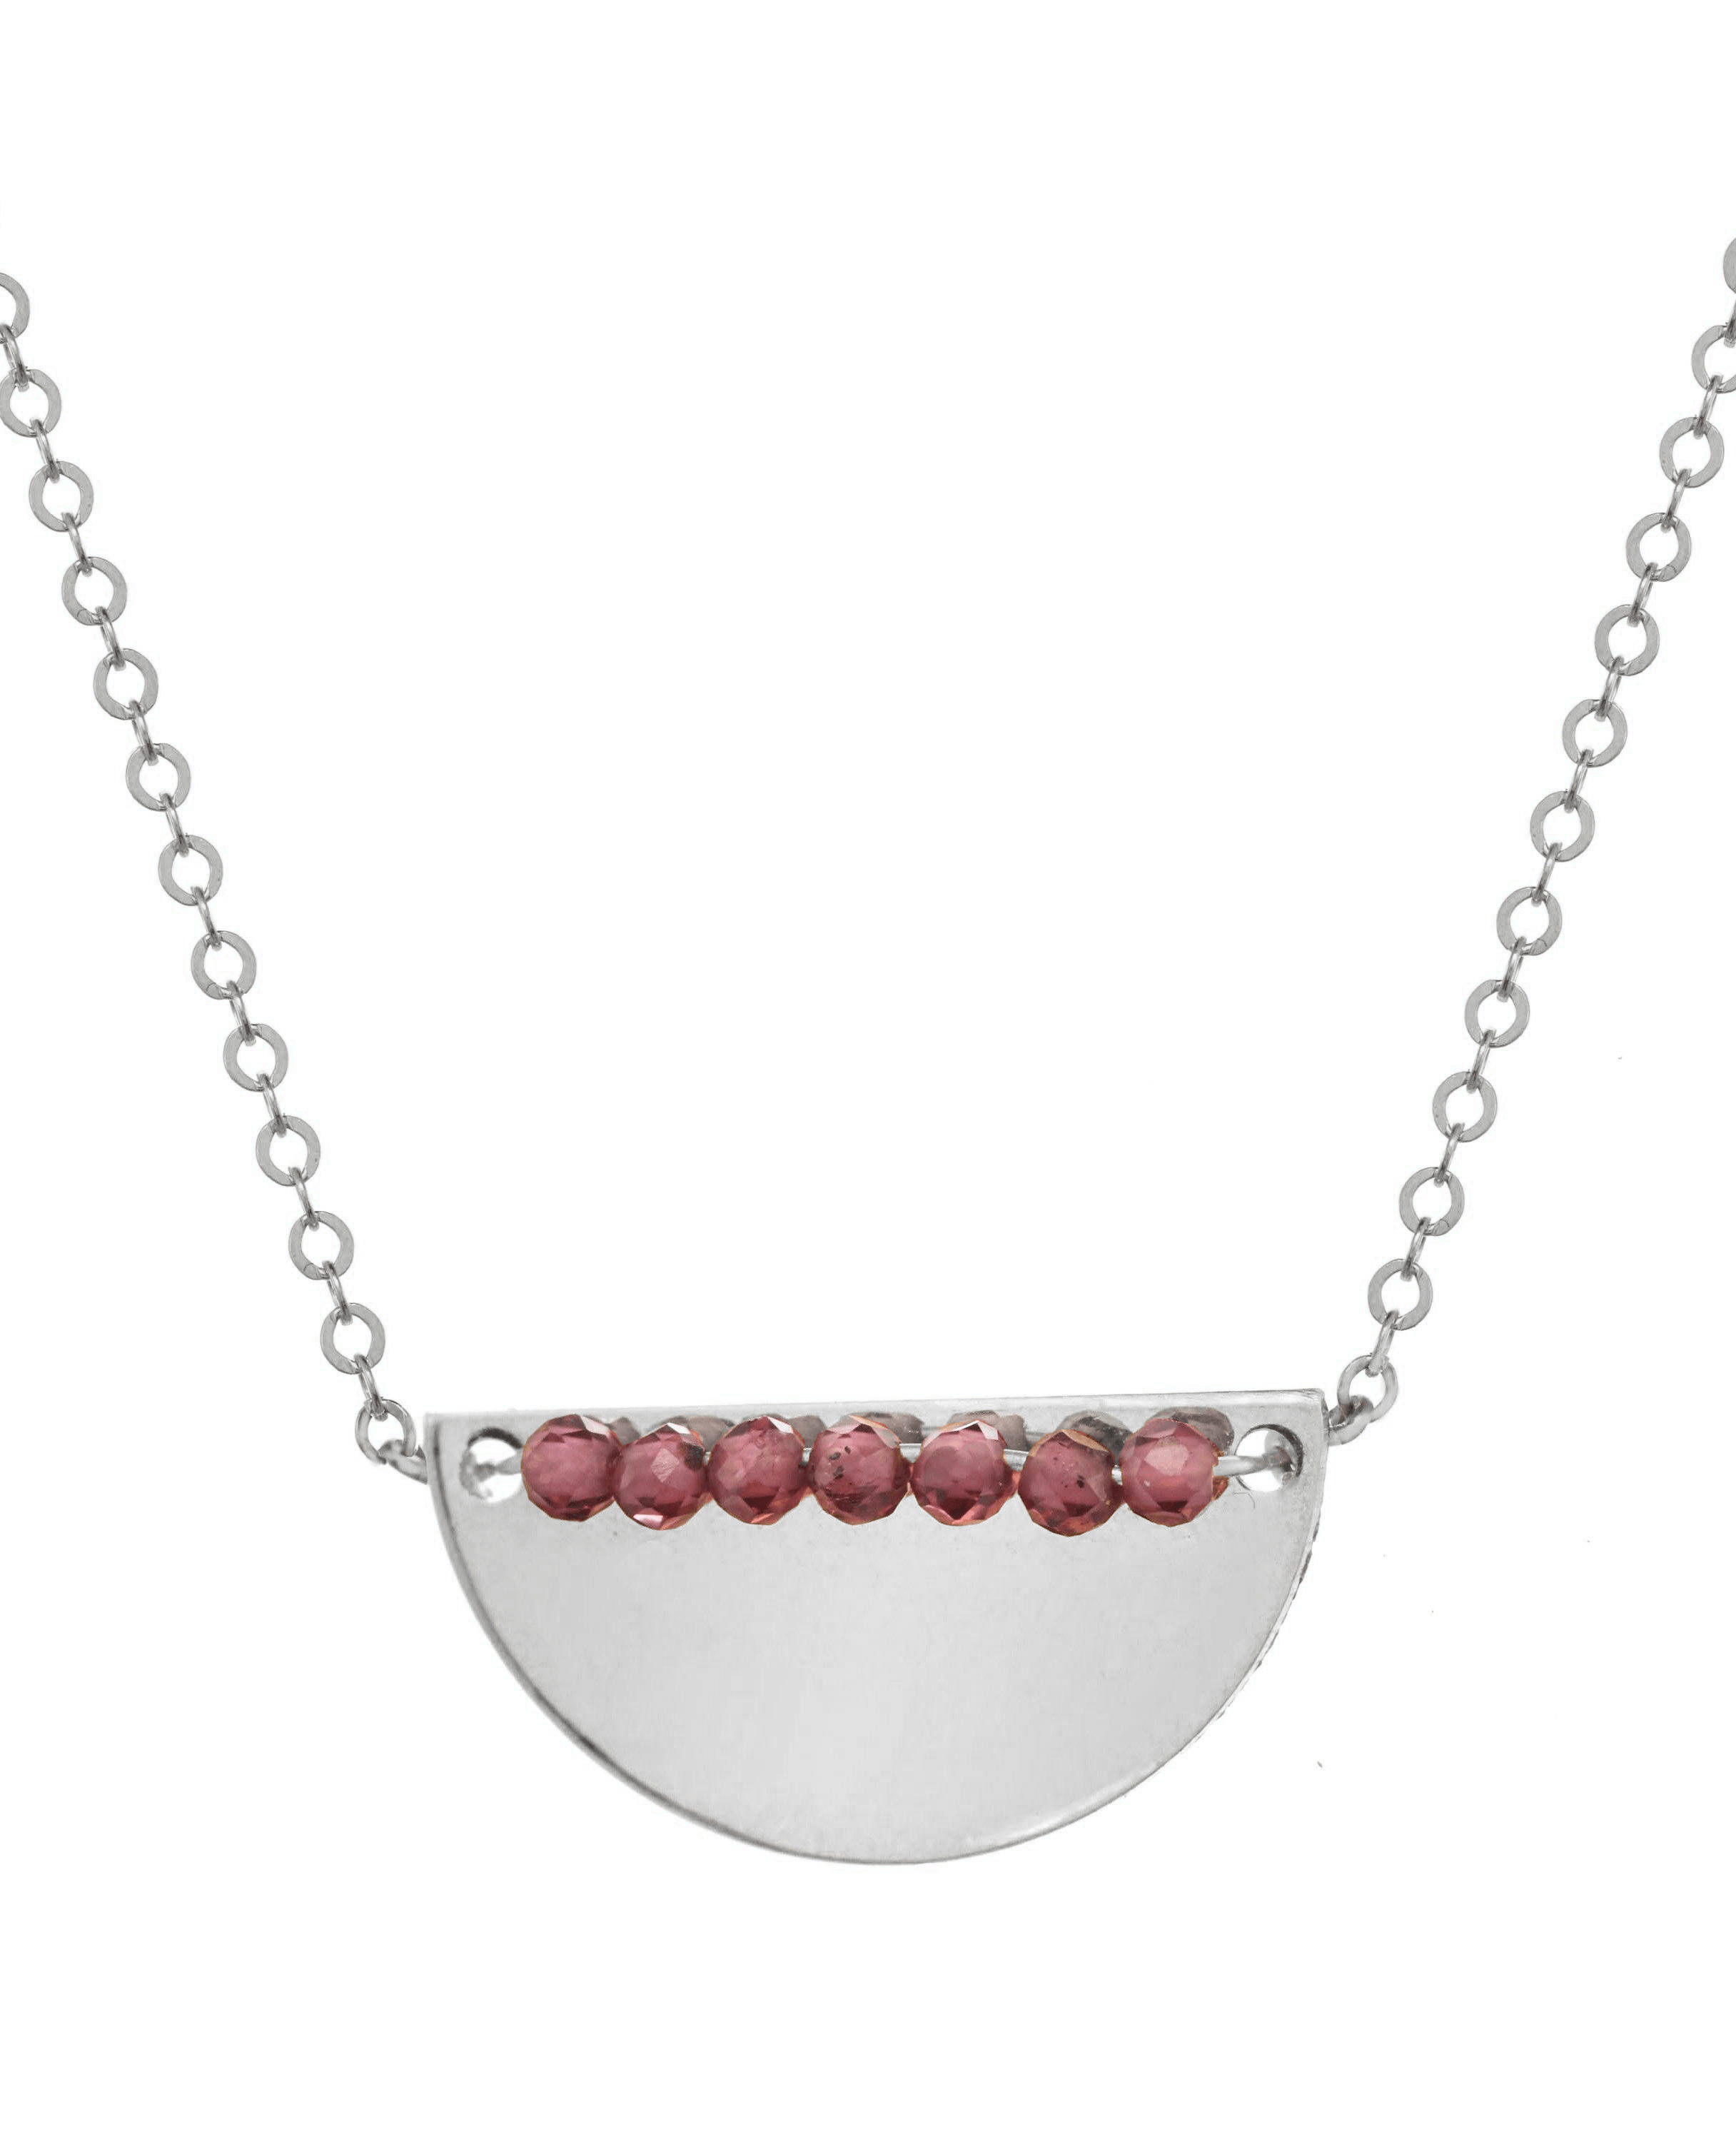 Medina Necklace by KOZAKH. A 16 to 18 inch adjustable length necklace, crafted in Sterling Silver, featuring 2mm faceted gems lined up on a half moon shaped flat metal.